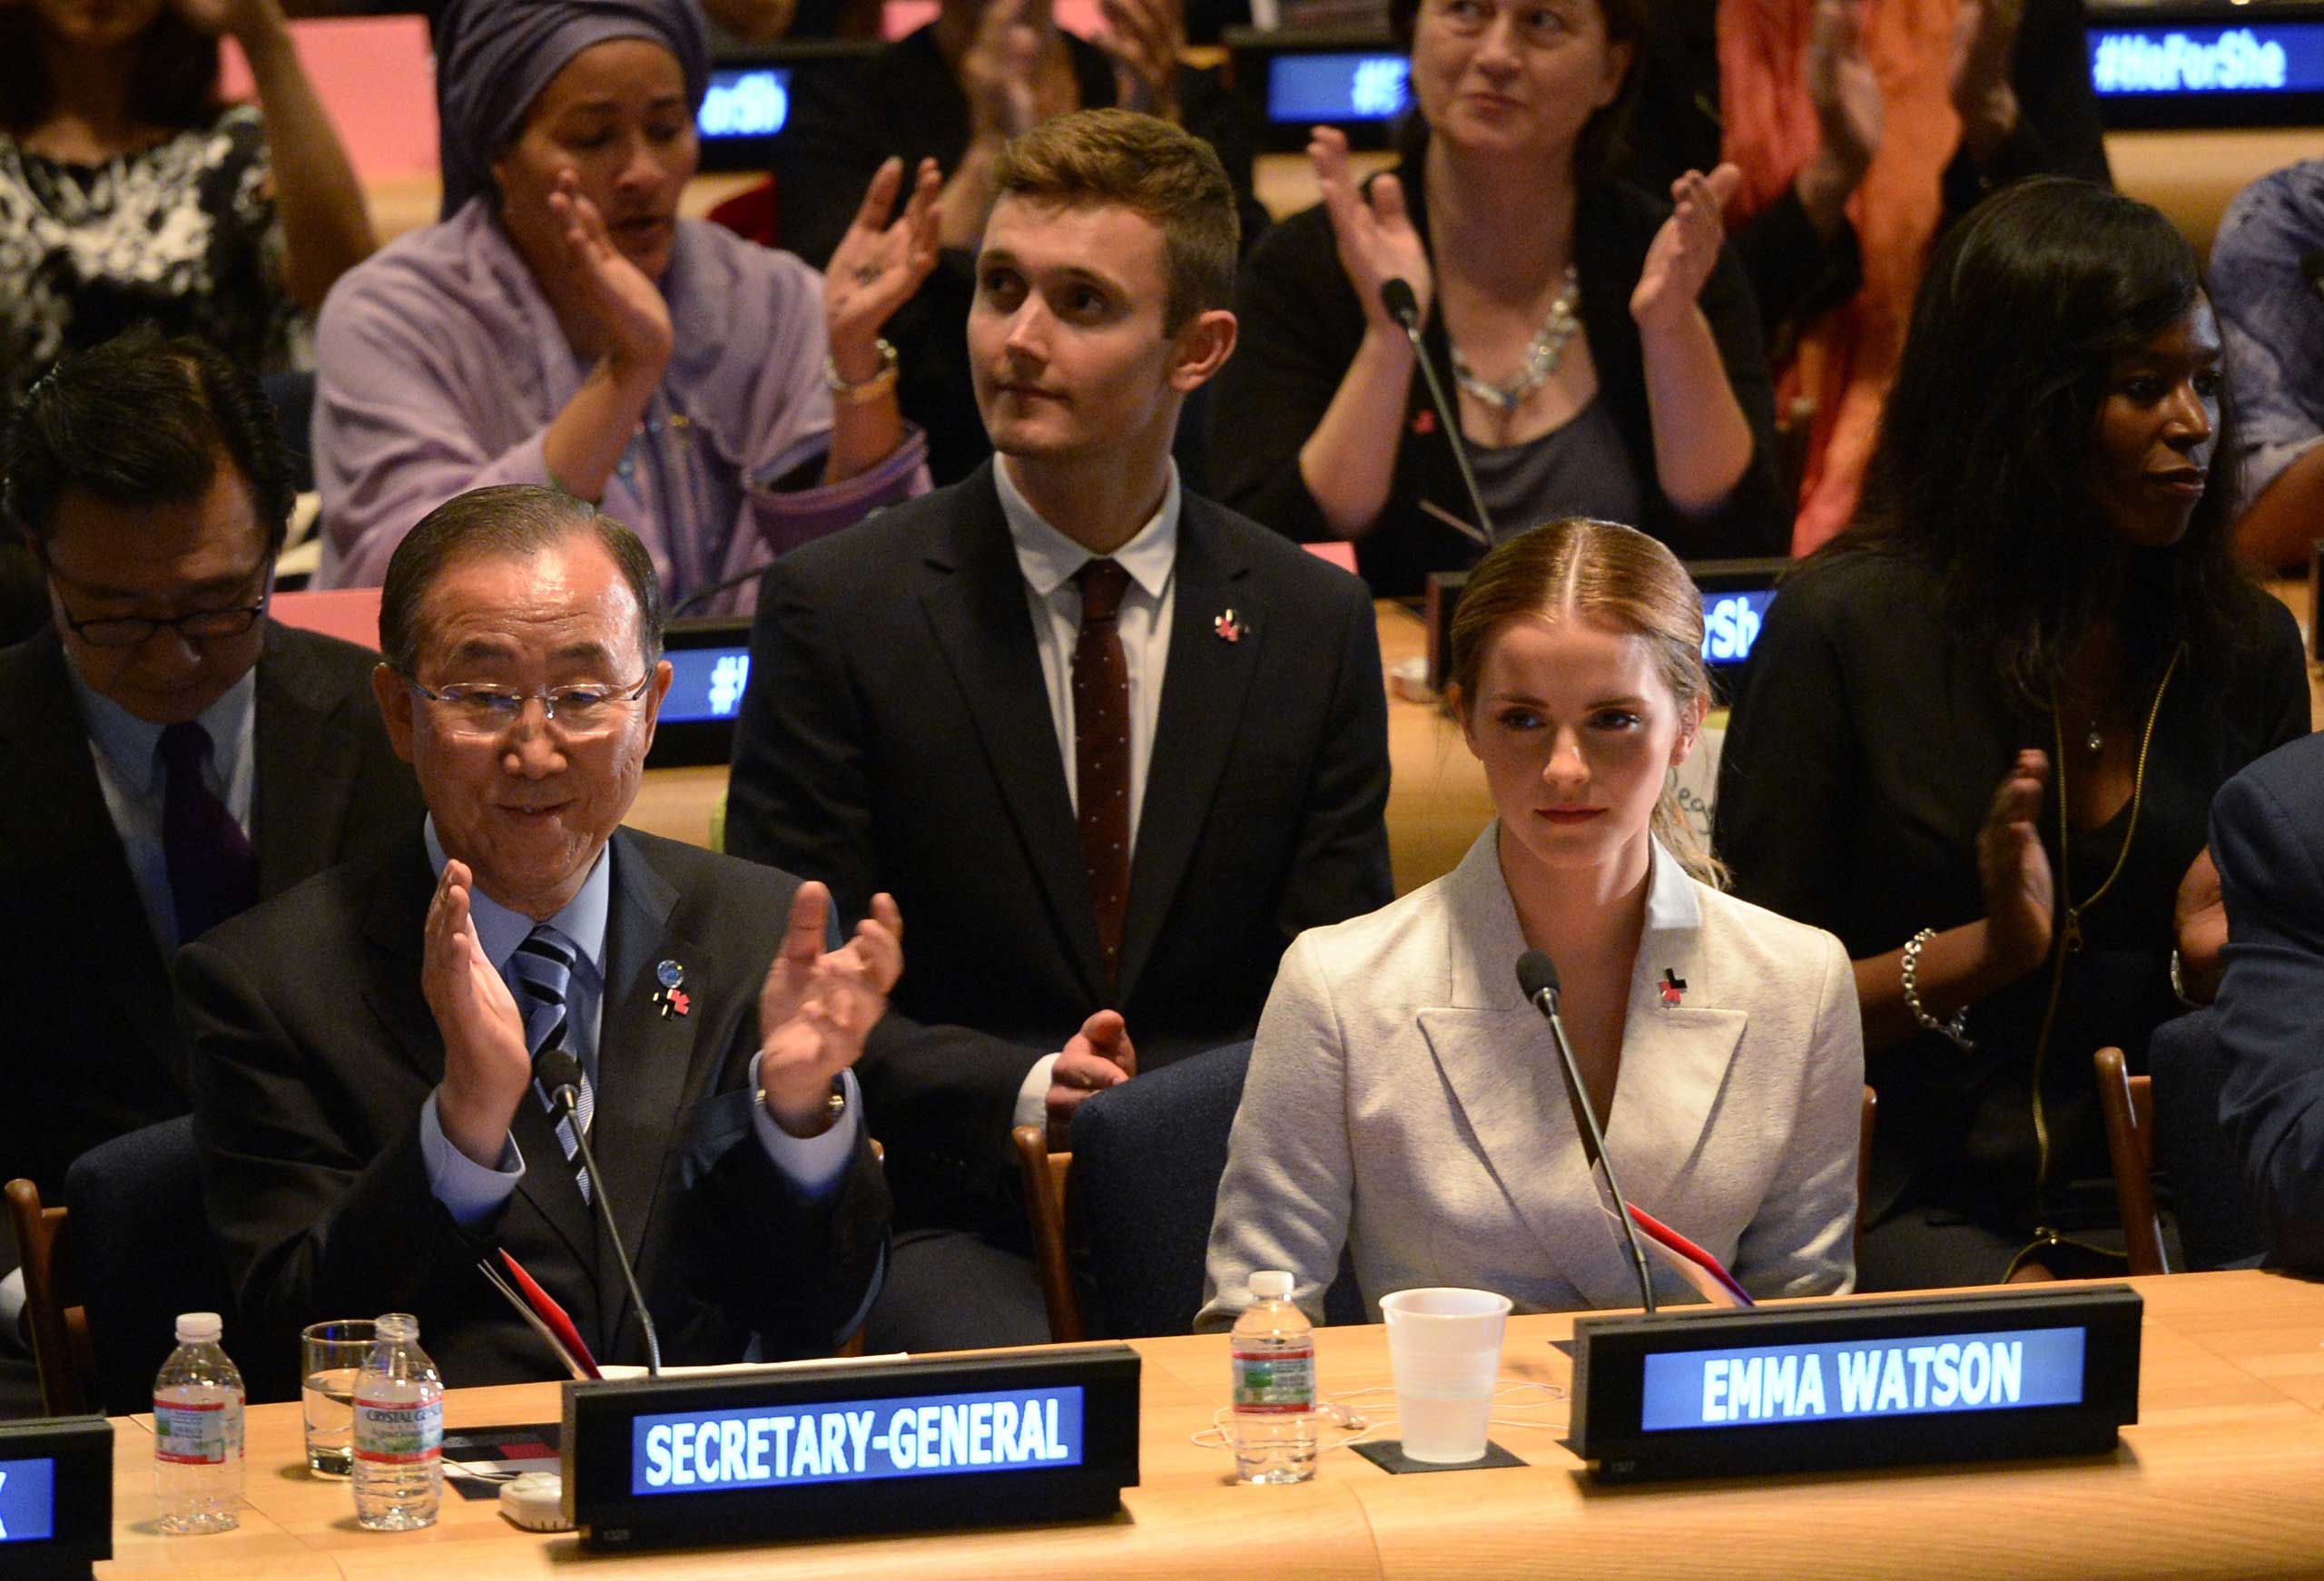 From left: UN Secretary-General Ban Ki-Moon and UN Women Goodwill Ambassador Emma Watson at the United Nations in New York City on Sept. 20, 2014.